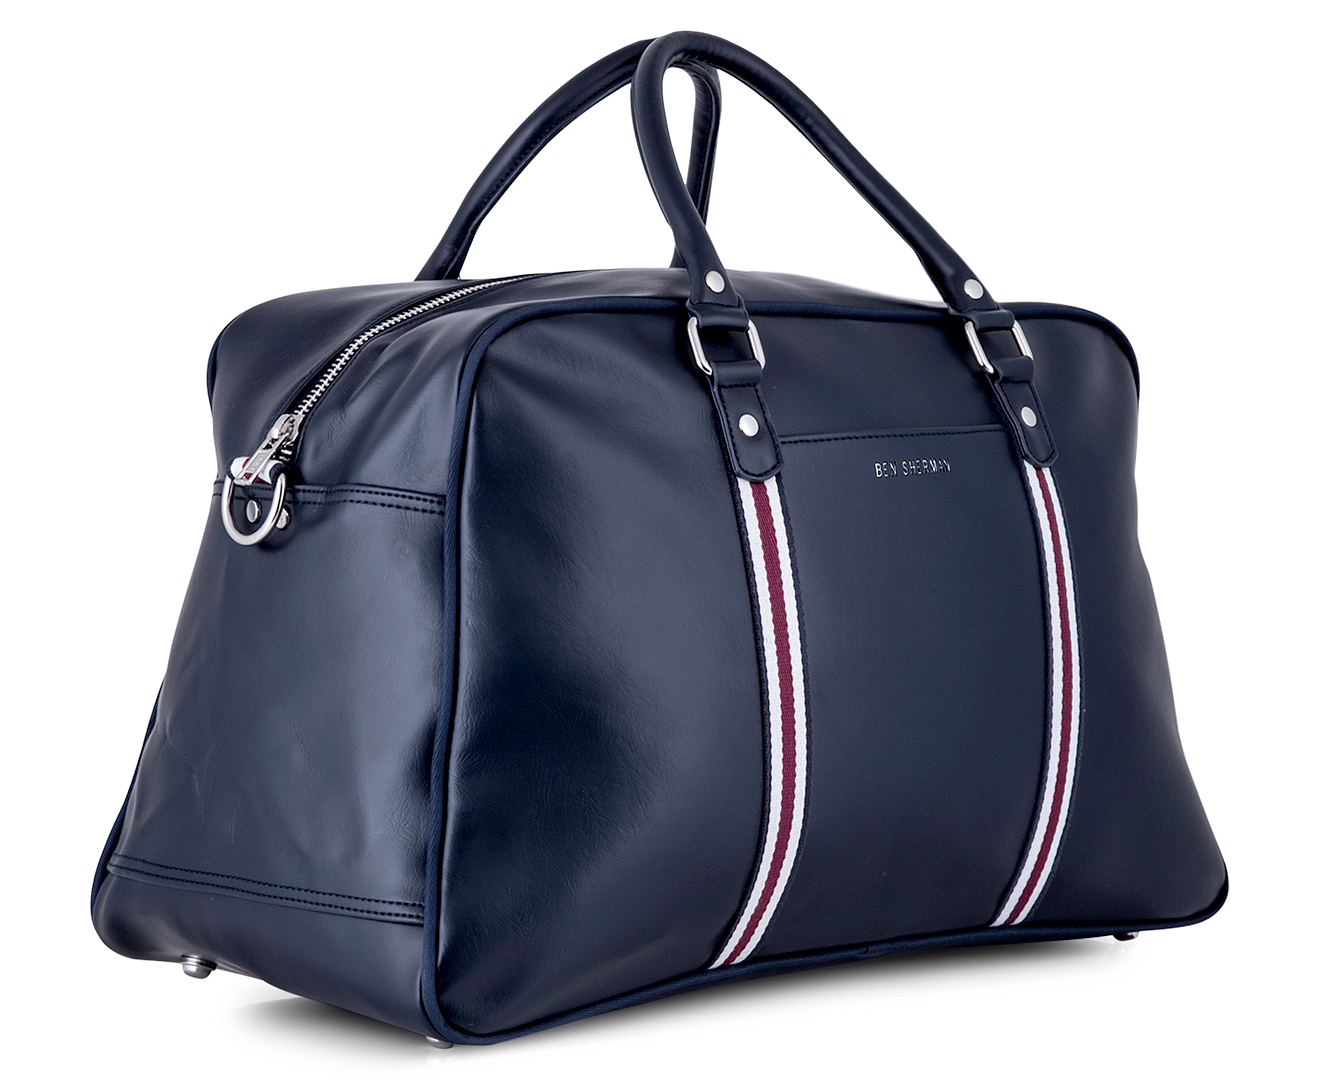 Ben Sherman Iconic Hold-All Bag - Navy | Scoopon Shopping